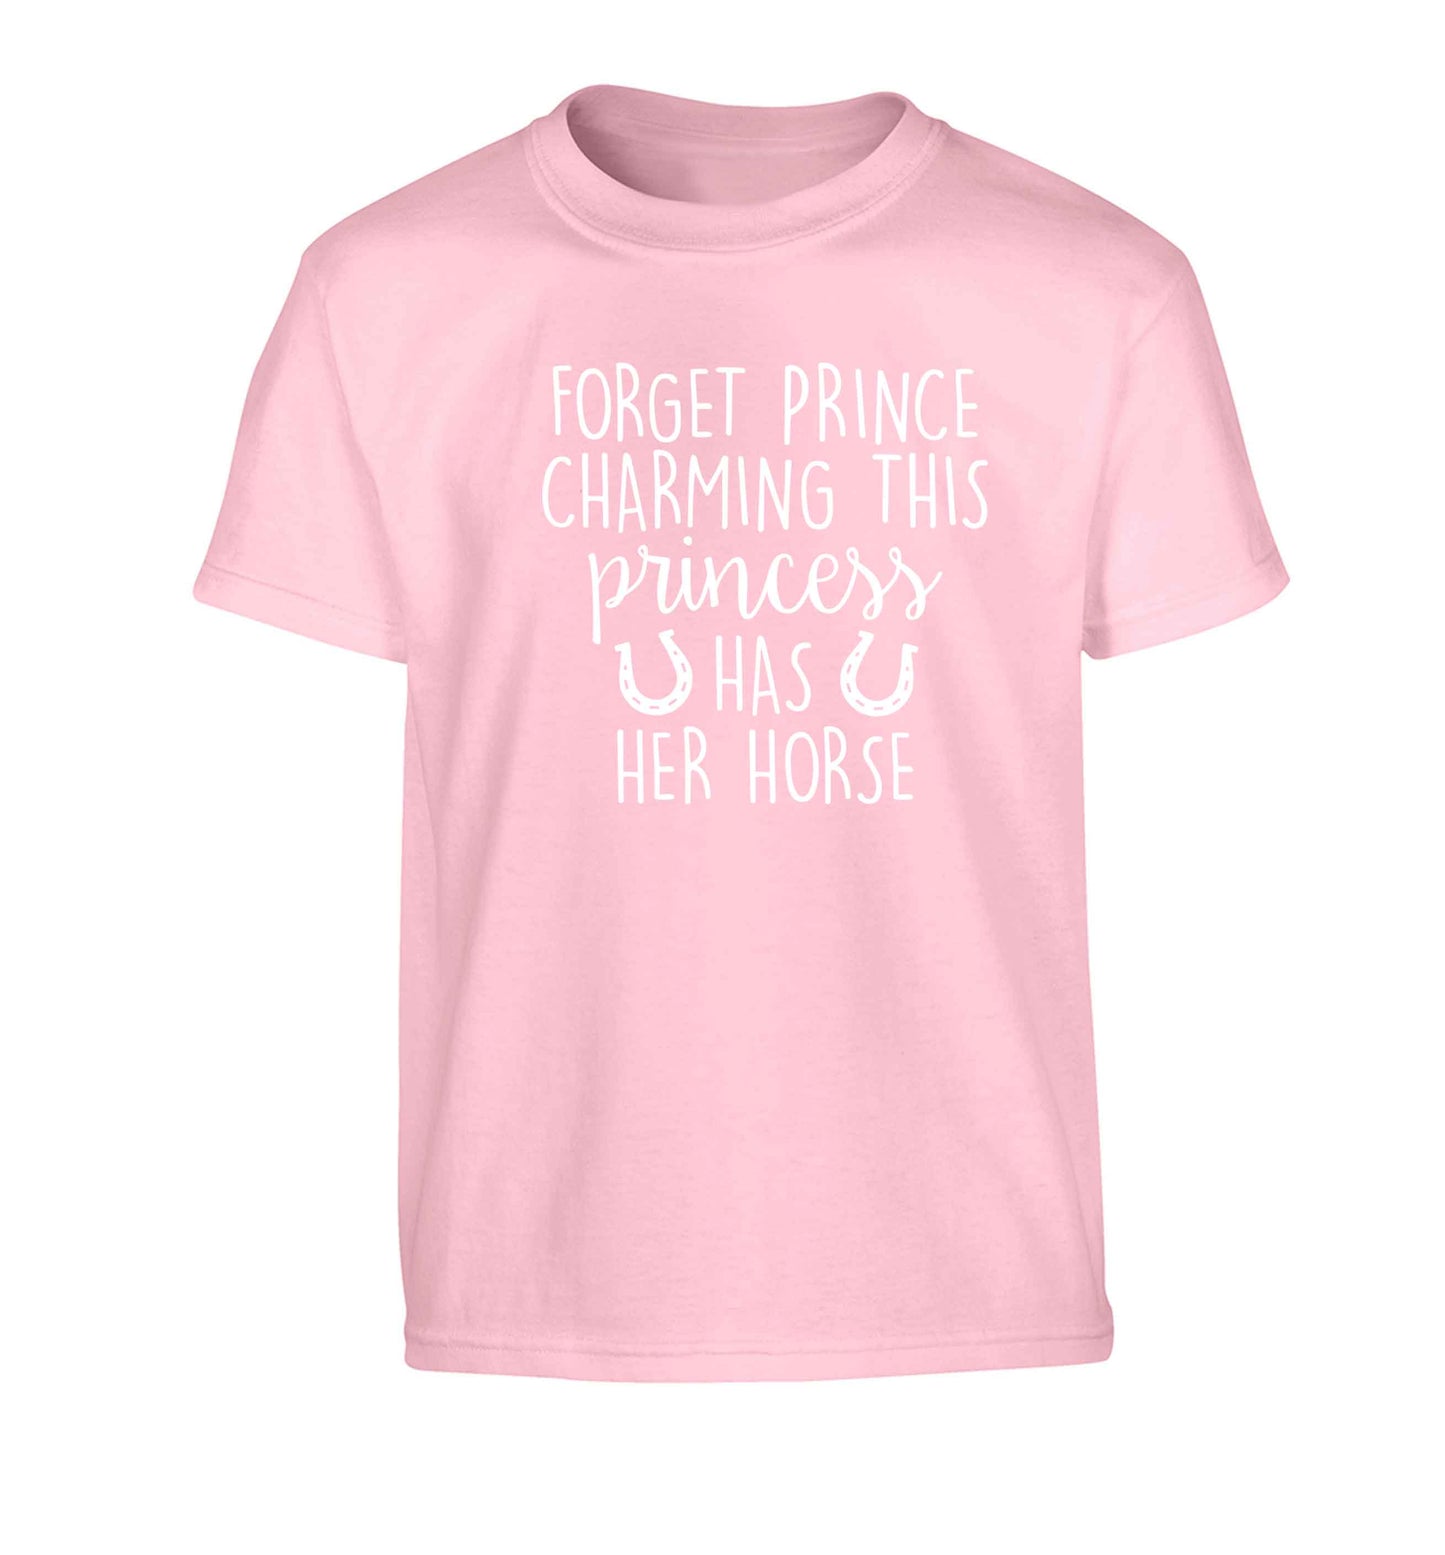 Forget prince charming this princess has her horse Children's light pink Tshirt 12-13 Years